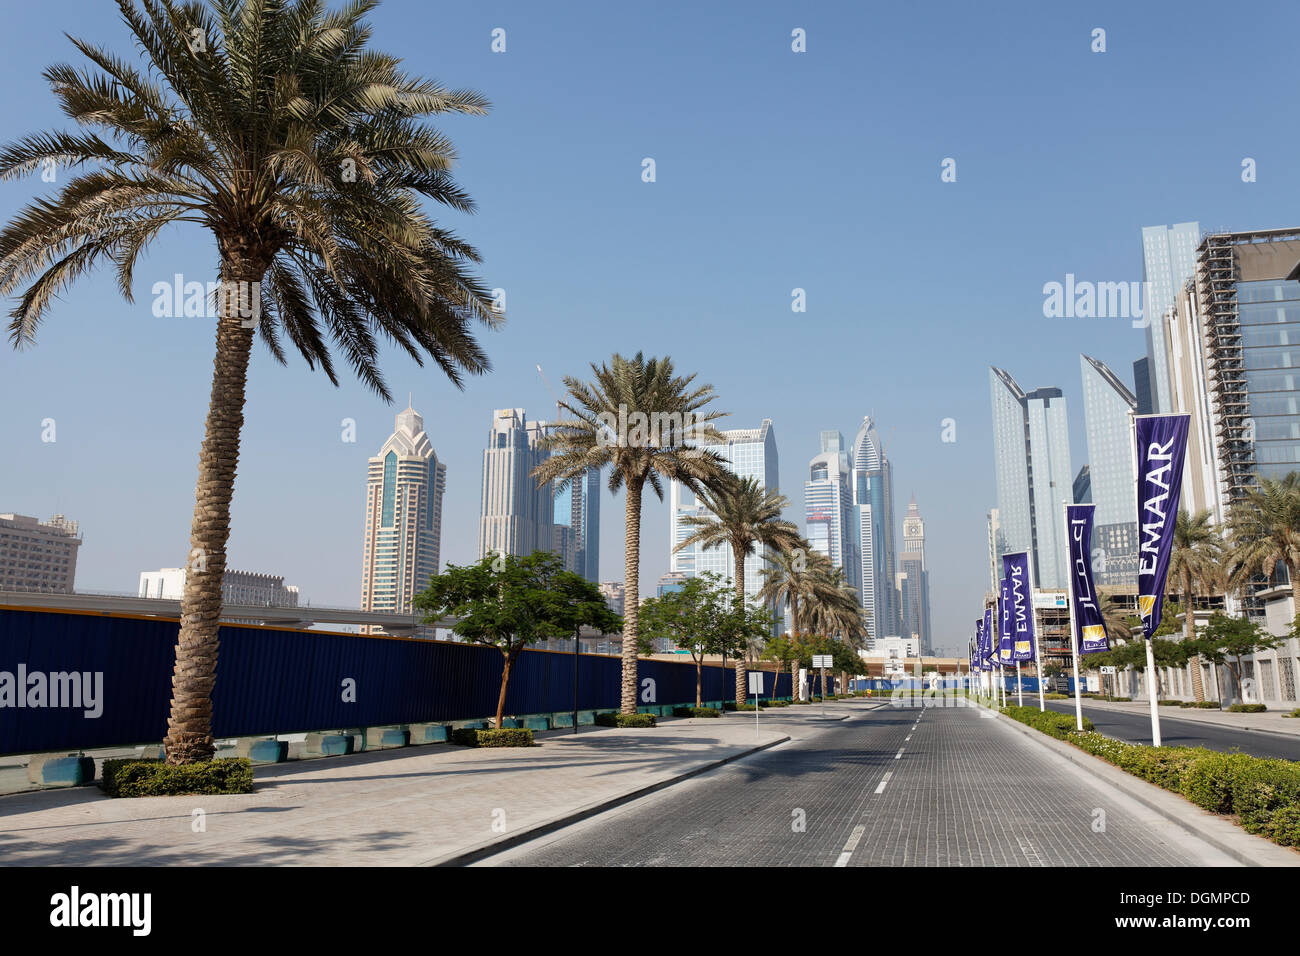 Newly laid road with no traffic, Emaar Square, Dubai, United Arab Emirates, Middle East, Asia Stock Photo